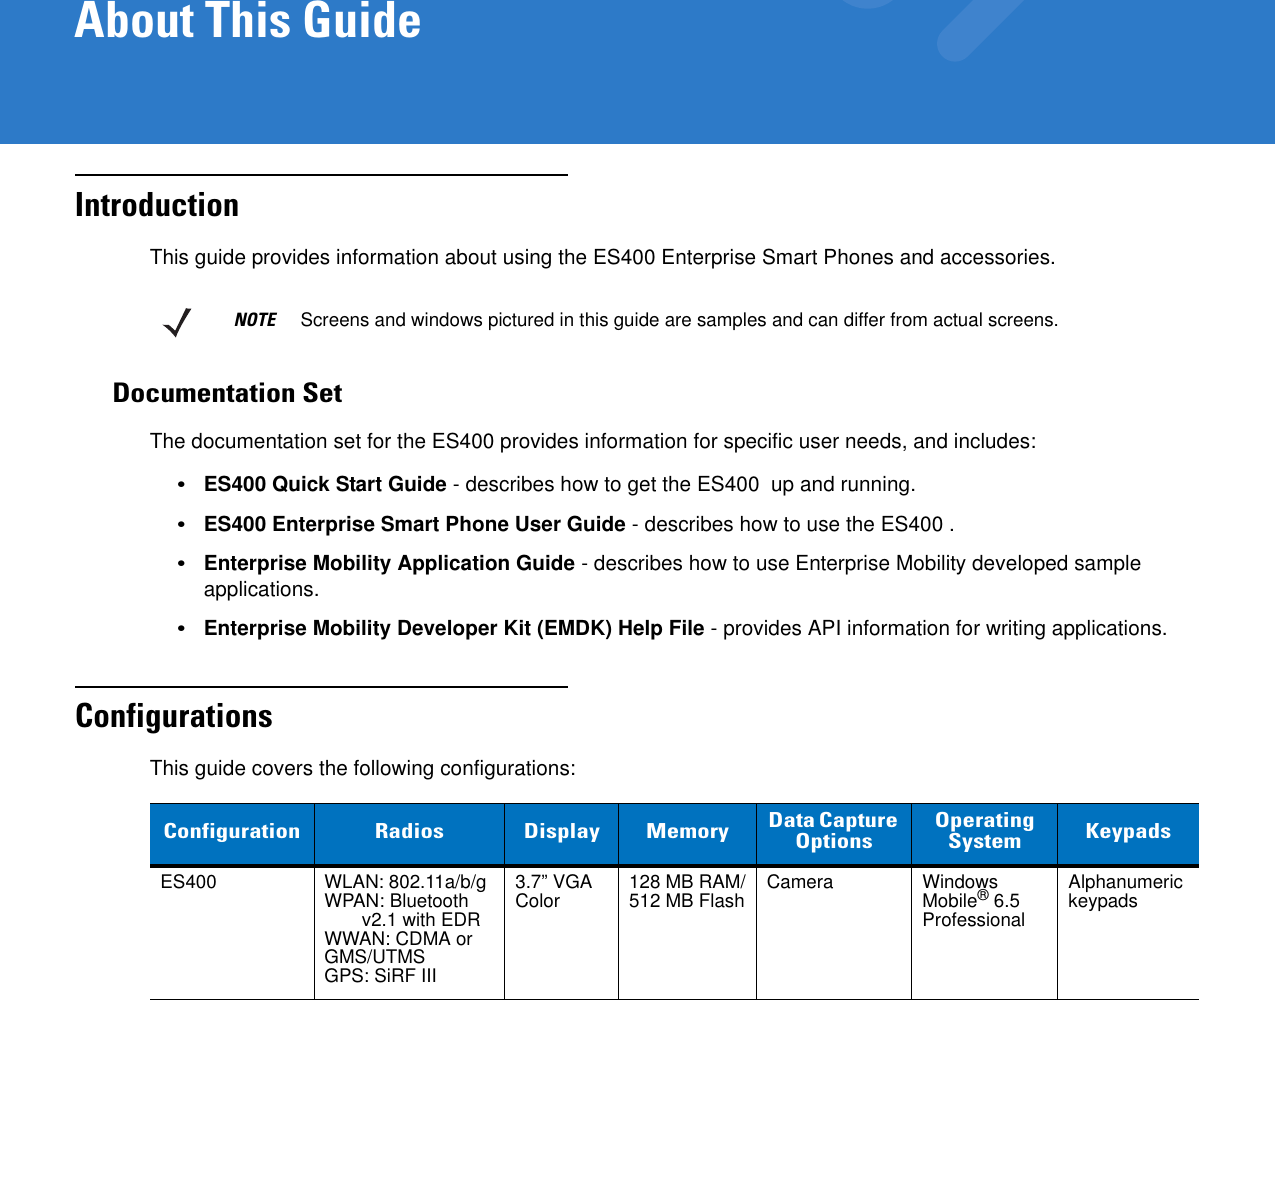 About This GuideIntroductionThis guide provides information about using the ES400 Enterprise Smart Phones and accessories.Documentation SetThe documentation set for the ES400 provides information for specific user needs, and includes:•ES400 Quick Start Guide - describes how to get the ES400  up and running.•ES400 Enterprise Smart Phone User Guide - describes how to use the ES400 .•Enterprise Mobility Application Guide - describes how to use Enterprise Mobility developed sample applications.•Enterprise Mobility Developer Kit (EMDK) Help File - provides API information for writing applications.ConfigurationsThis guide covers the following configurations:NOTE     Screens and windows pictured in this guide are samples and can differ from actual screens.Configuration Radios Display Memory Data Capture OptionsOperatingSystem KeypadsES400 WLAN: 802.11a/b/gWPAN: Bluetooth v2.1 with EDRWWAN: CDMA or GMS/UTMSGPS: SiRF III3.7” VGA Color 128 MB RAM/512 MB Flash Camera Windows Mobile®6.5 ProfessionalAlphanumeric keypads